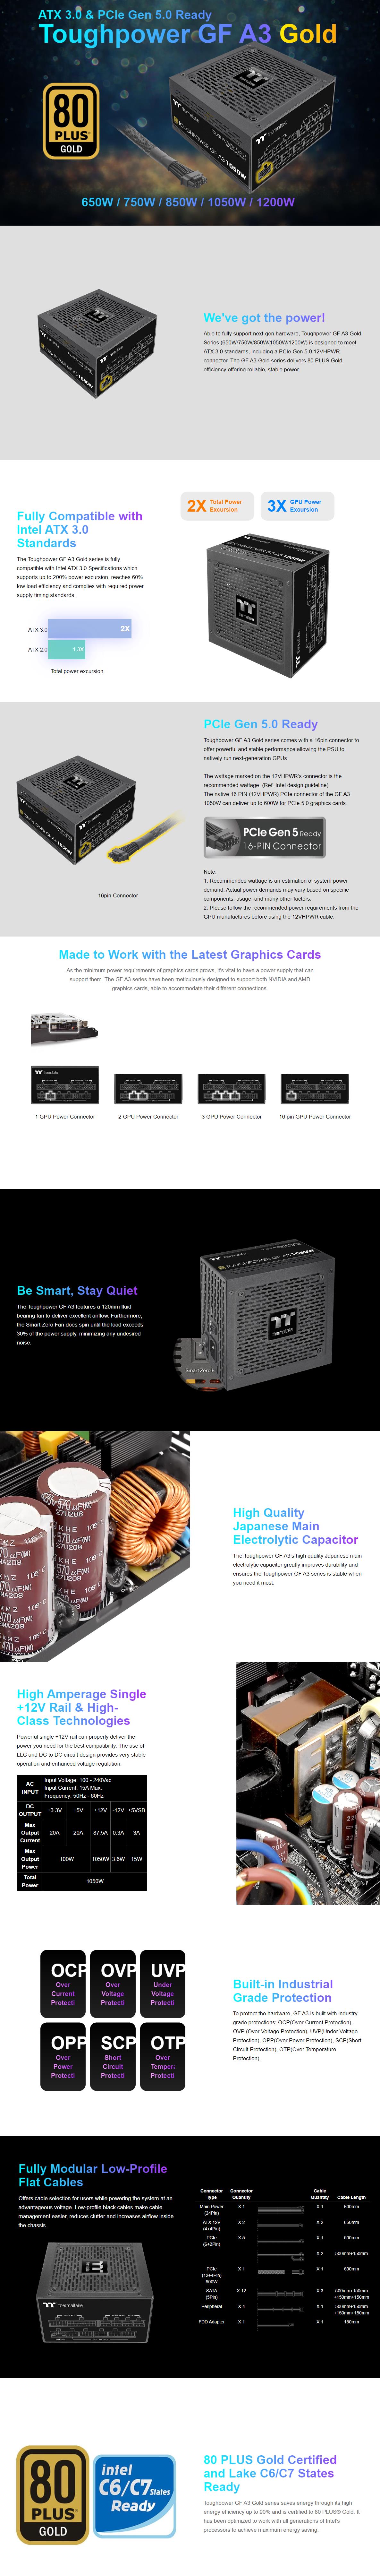 A large marketing image providing additional information about the product Thermaltake Toughpower GF A3 - 1200W 80PLUS Gold PCIe 5.0 ATX Modular PSU - Additional alt info not provided